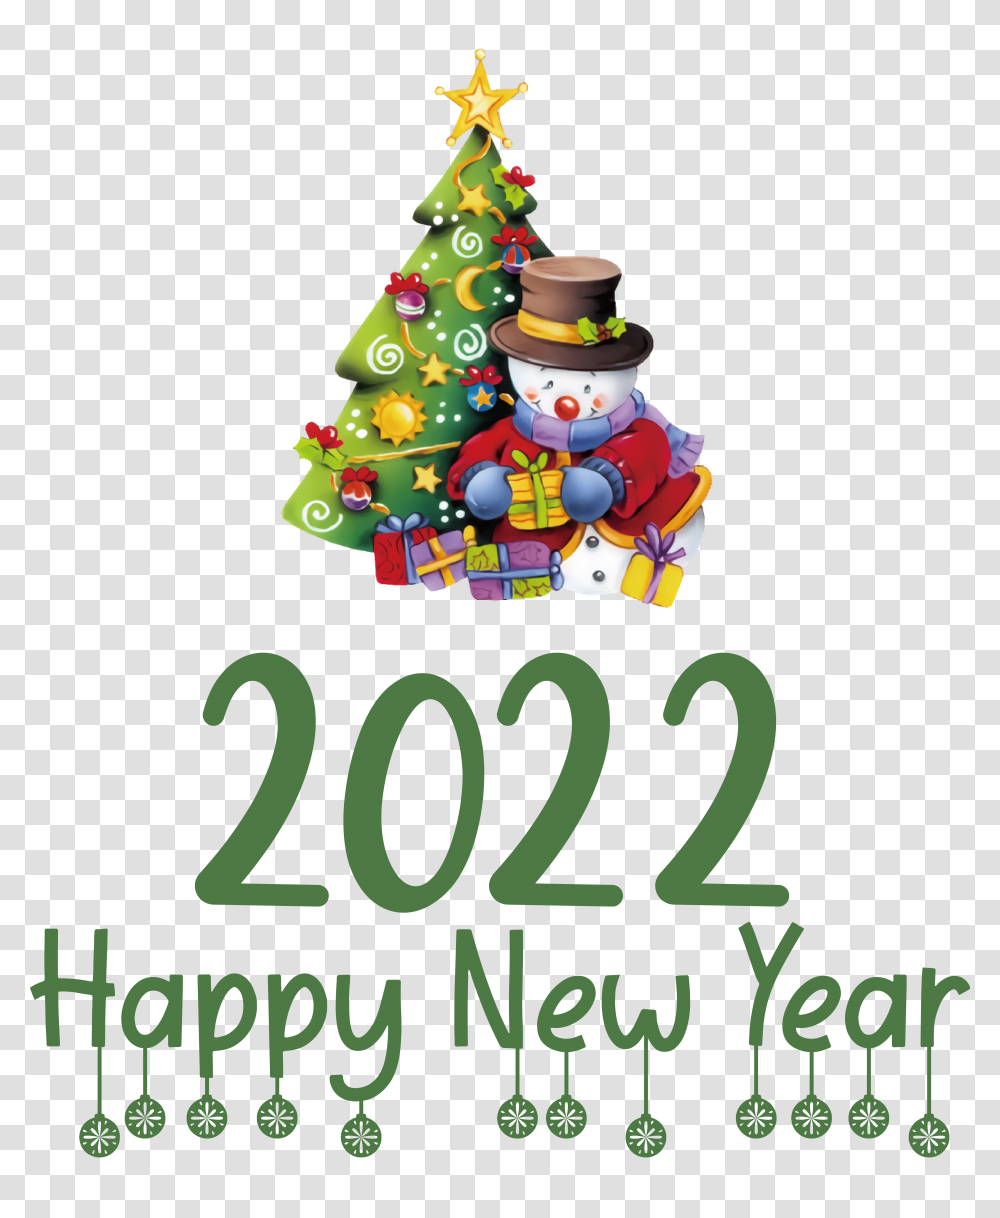 Merry Christmas And Happy New Year 2022 Christmas Day New Year For New Year, Tree, Plant, Text, Ornament Transparent Png